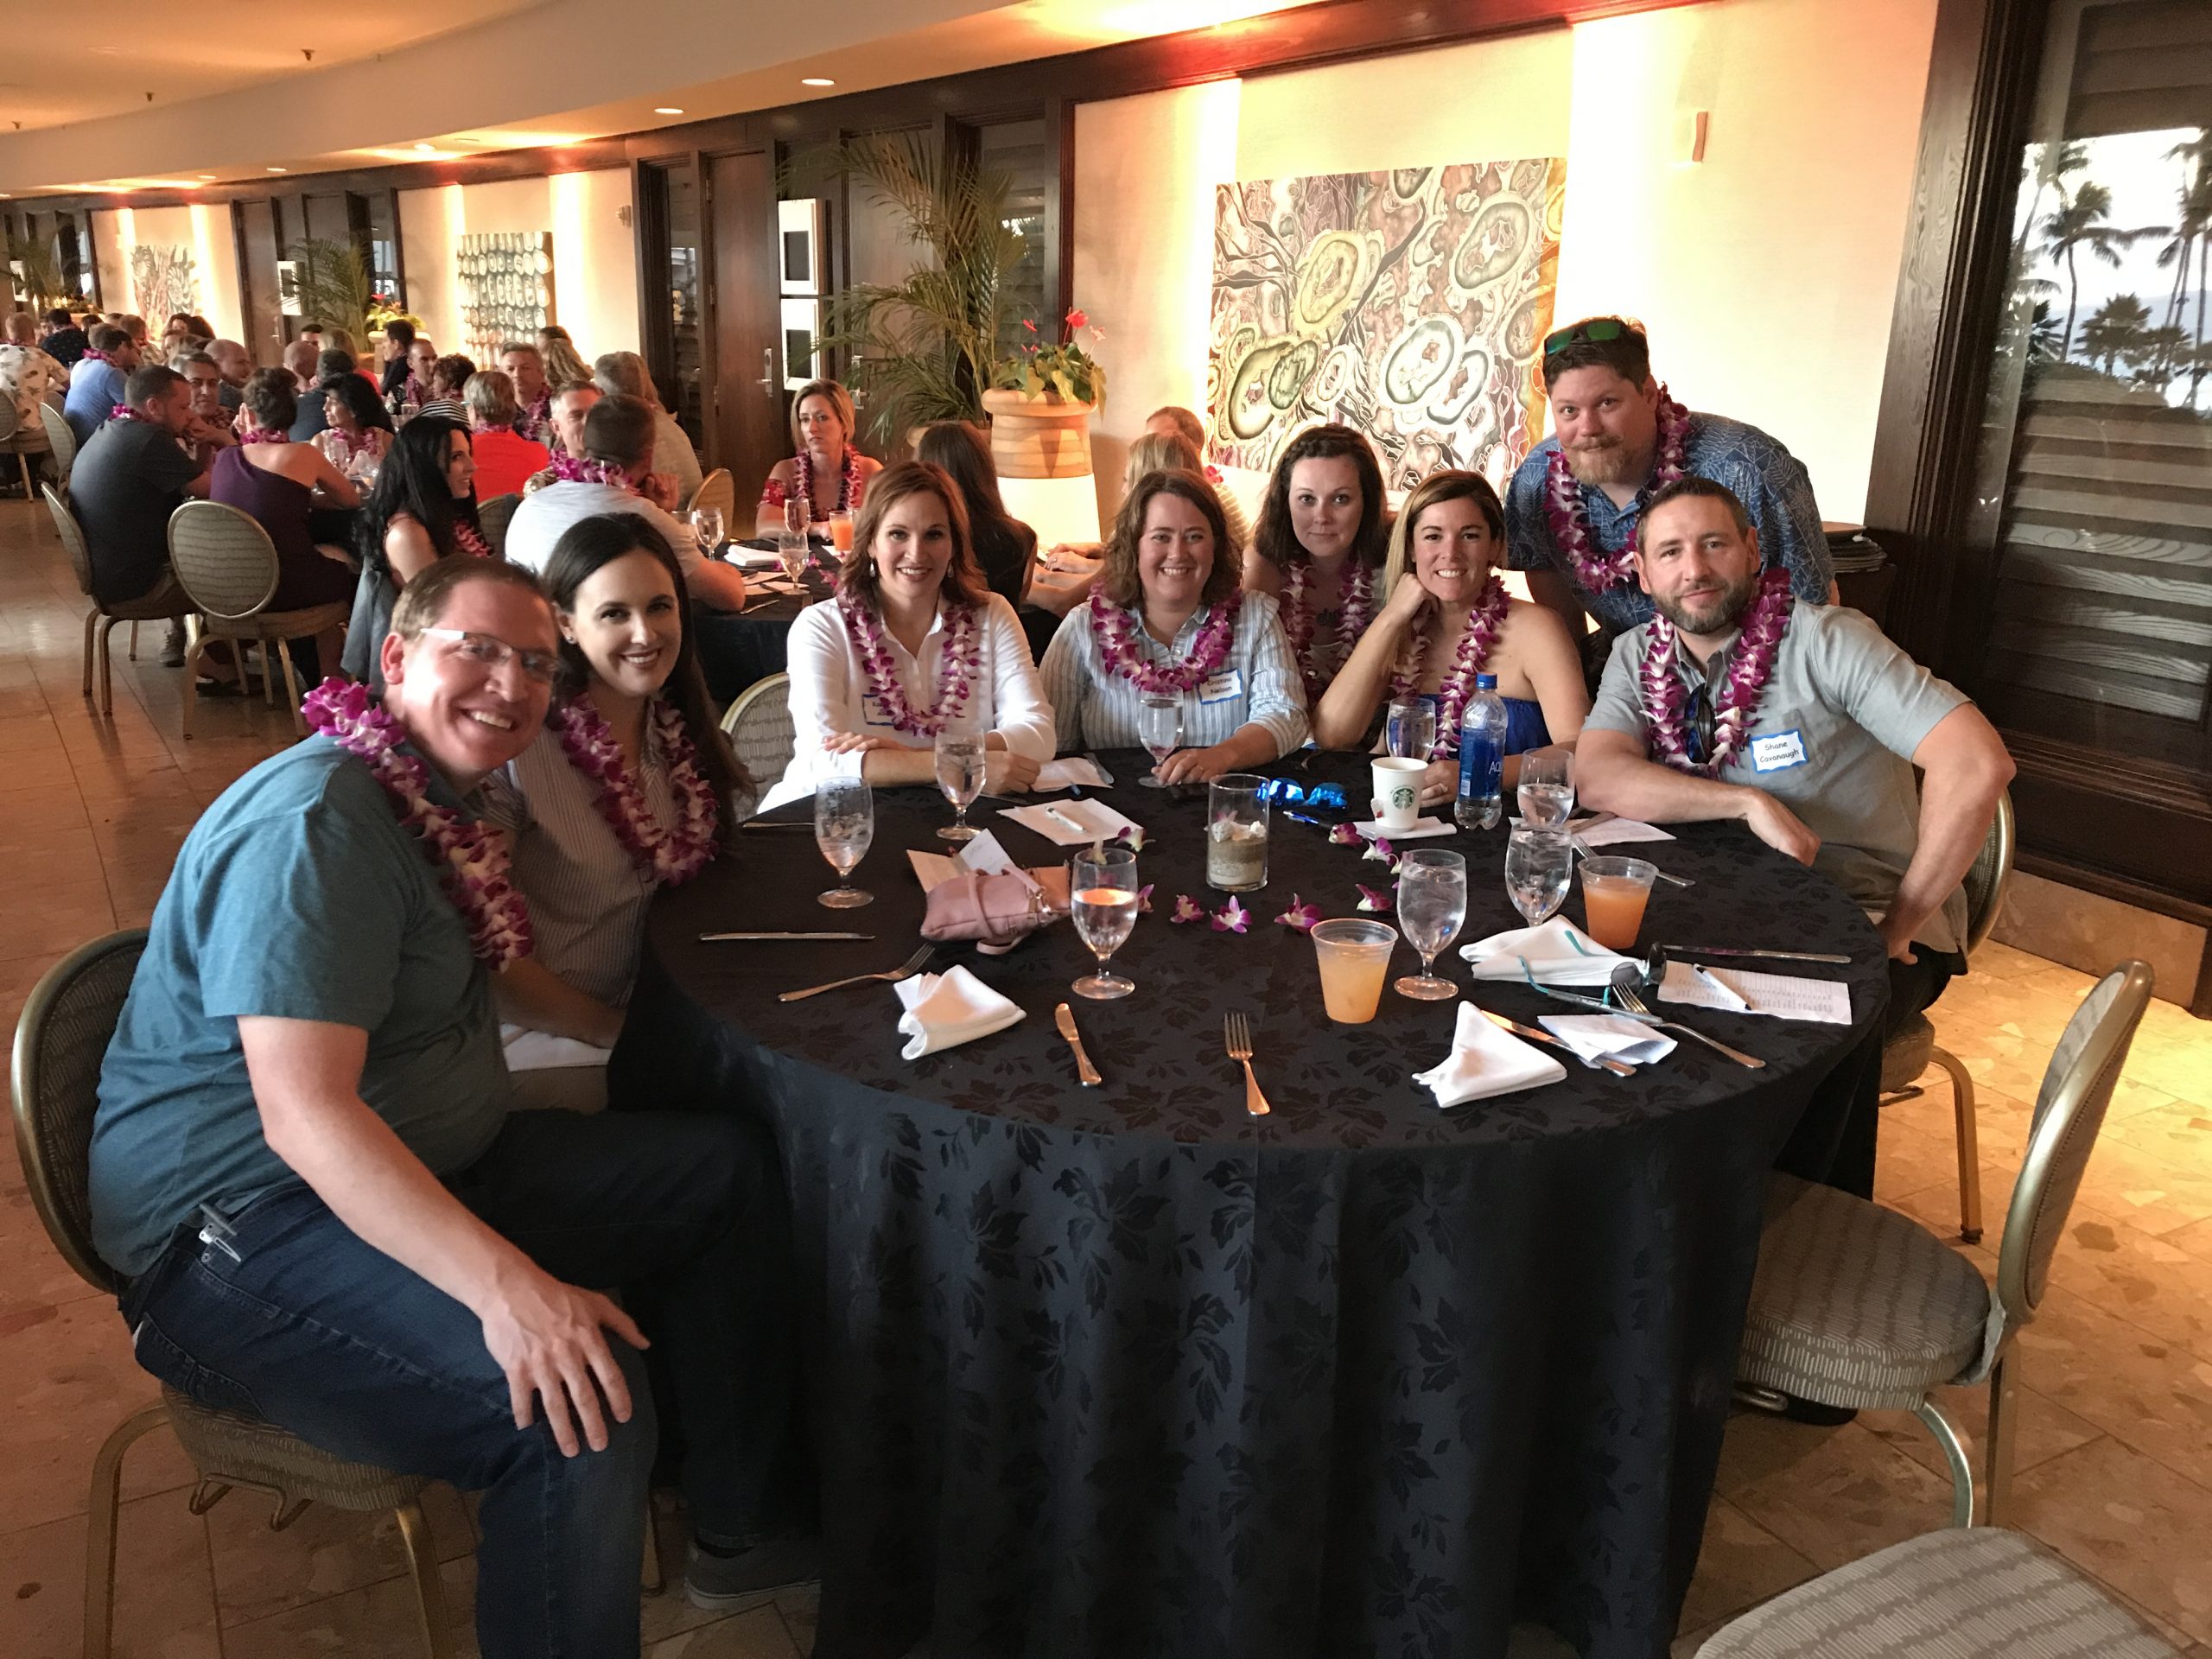 Men and women sitting around dinner table and smiling for photo while wearing leis